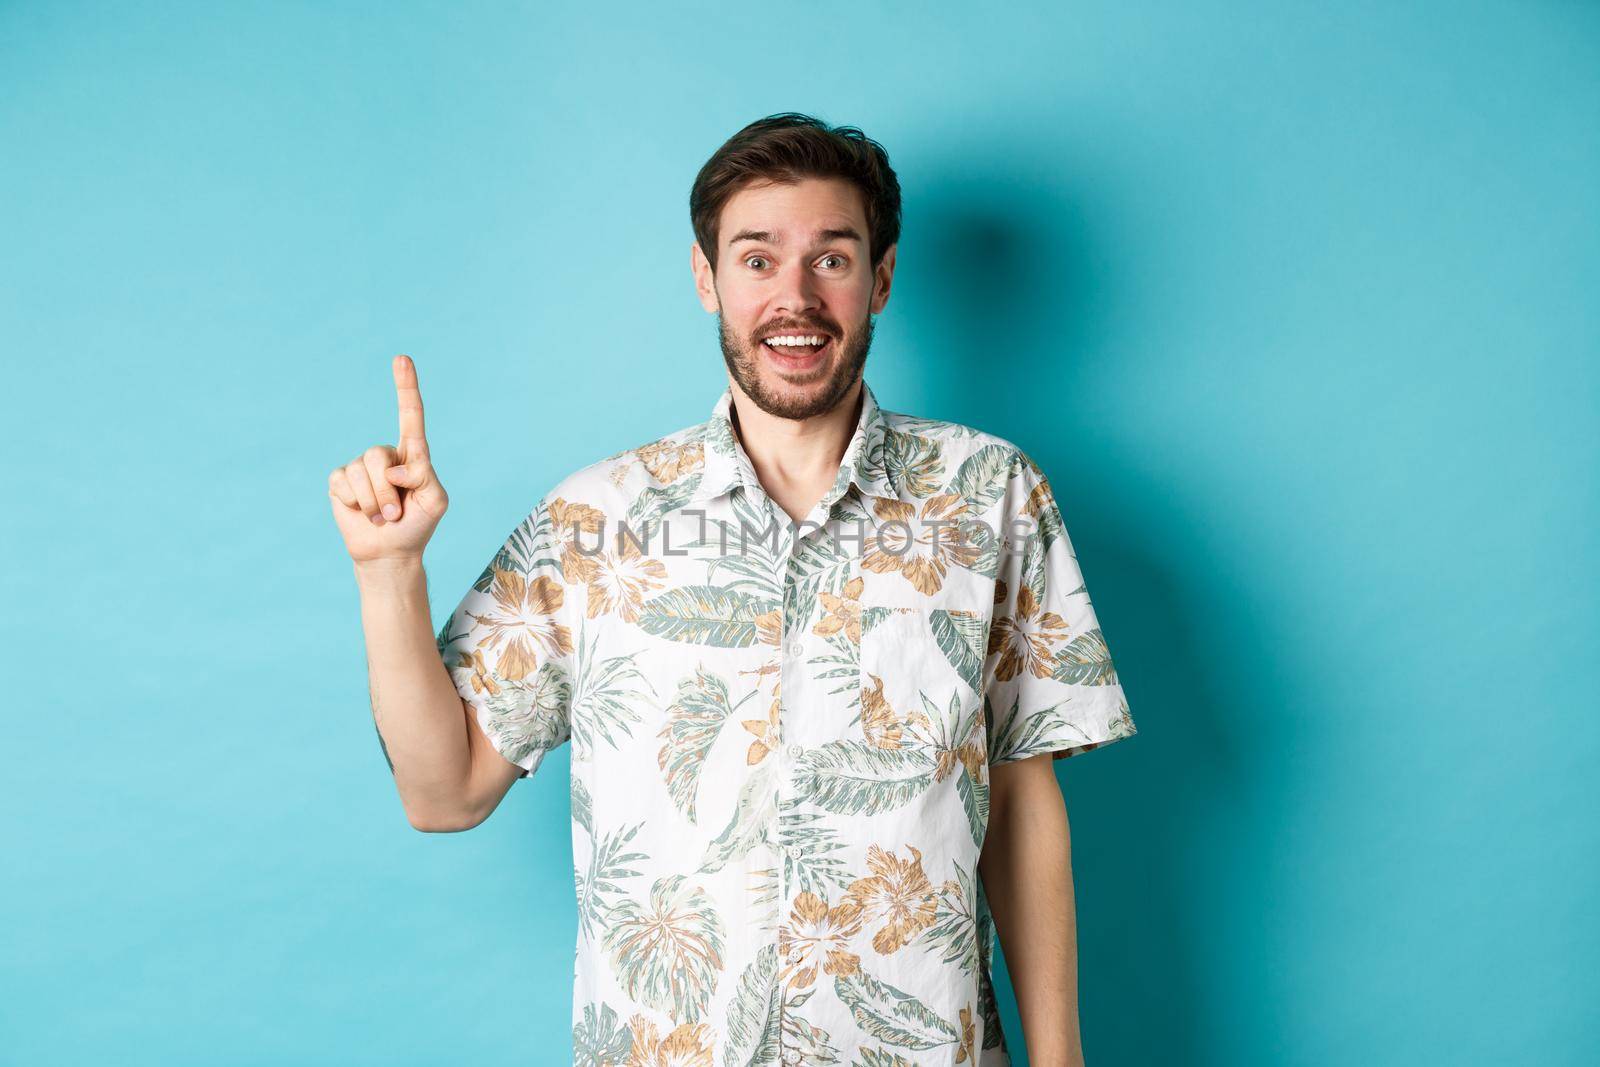 Excited guy in hawaiian shirt talking about vacation, looking amazed and pointing up, standing on blue background.